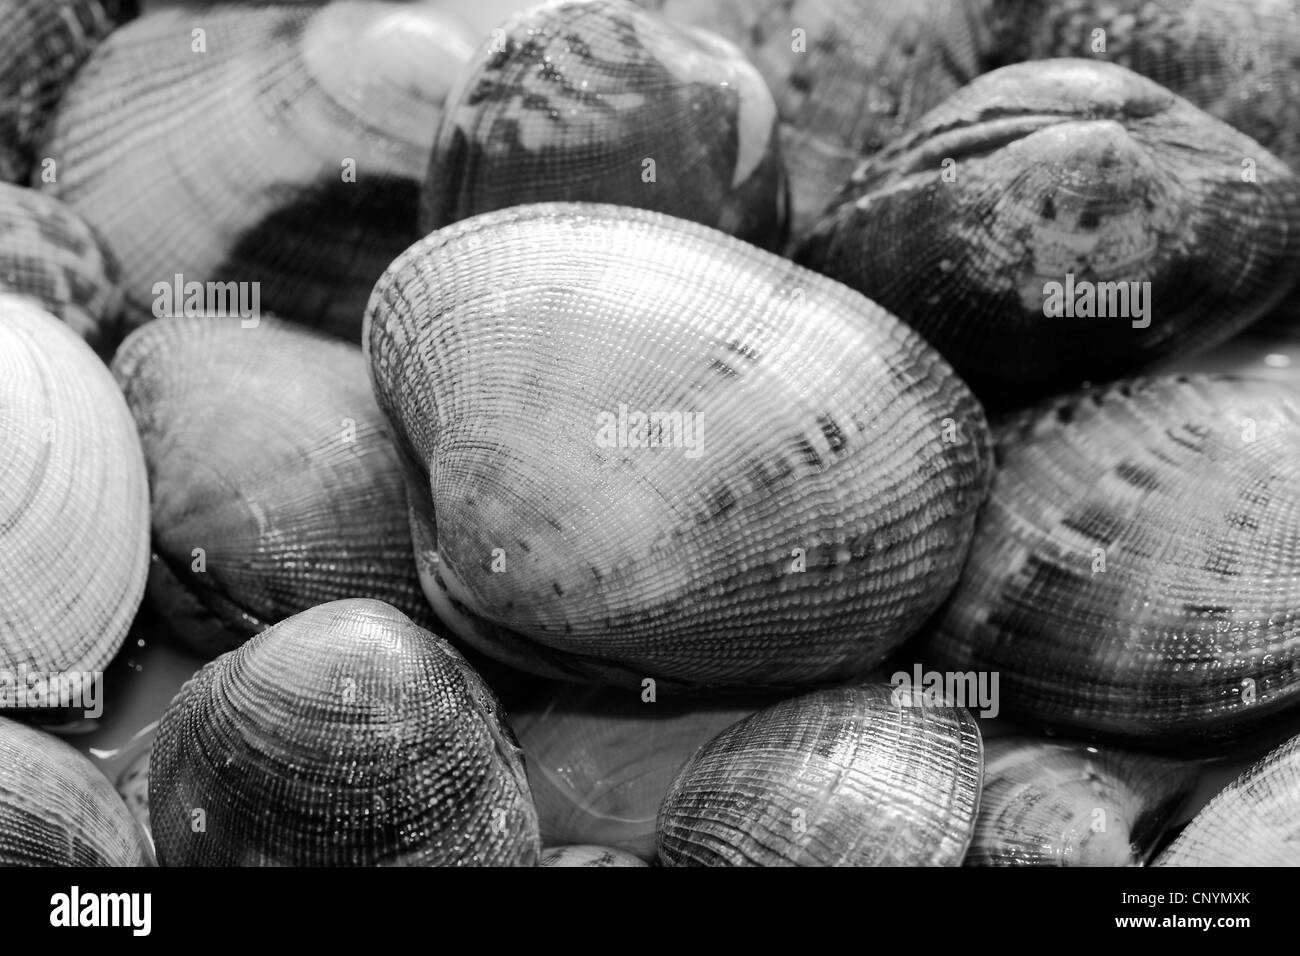 seafood, food, shellfish, healthy, nutrition, fresh, cooked, cuisine, restaurant, sea, gourmet, cooking, chowder, health, market Stock Photo